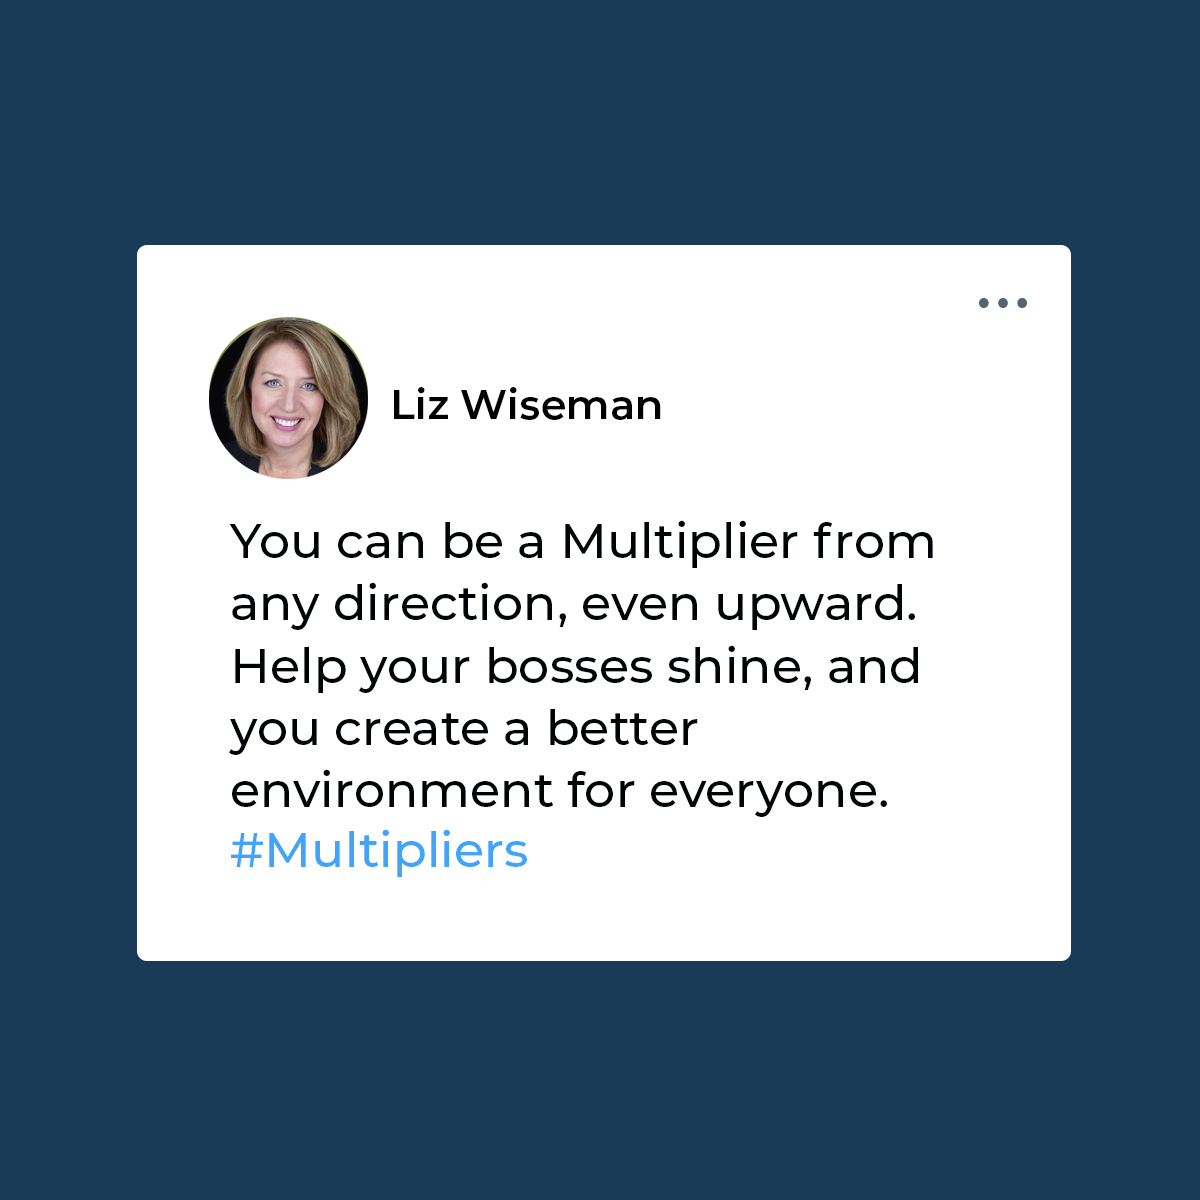 Being a Multiplier also means enhancing your bosses' strengths and helping them succeed. This approach improves your work environment and creates a positive loop of empowerment and recognition, boosting everyone's ability to innovate. #Multipliers